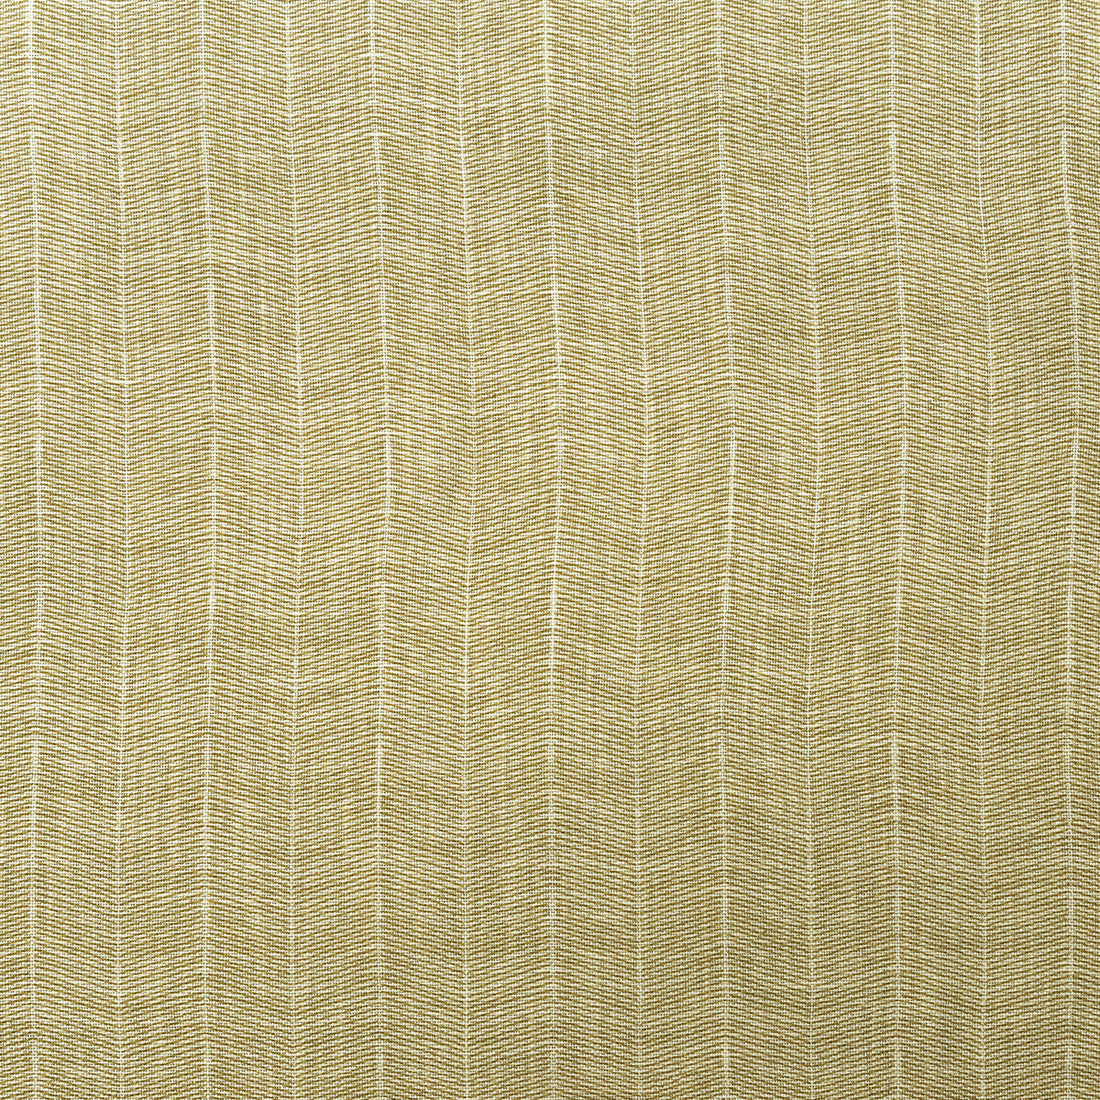 Furrow fabric in honey color - pattern AM100380.416.0 - by Kravet Couture in the Andrew Martin Garden Path collection